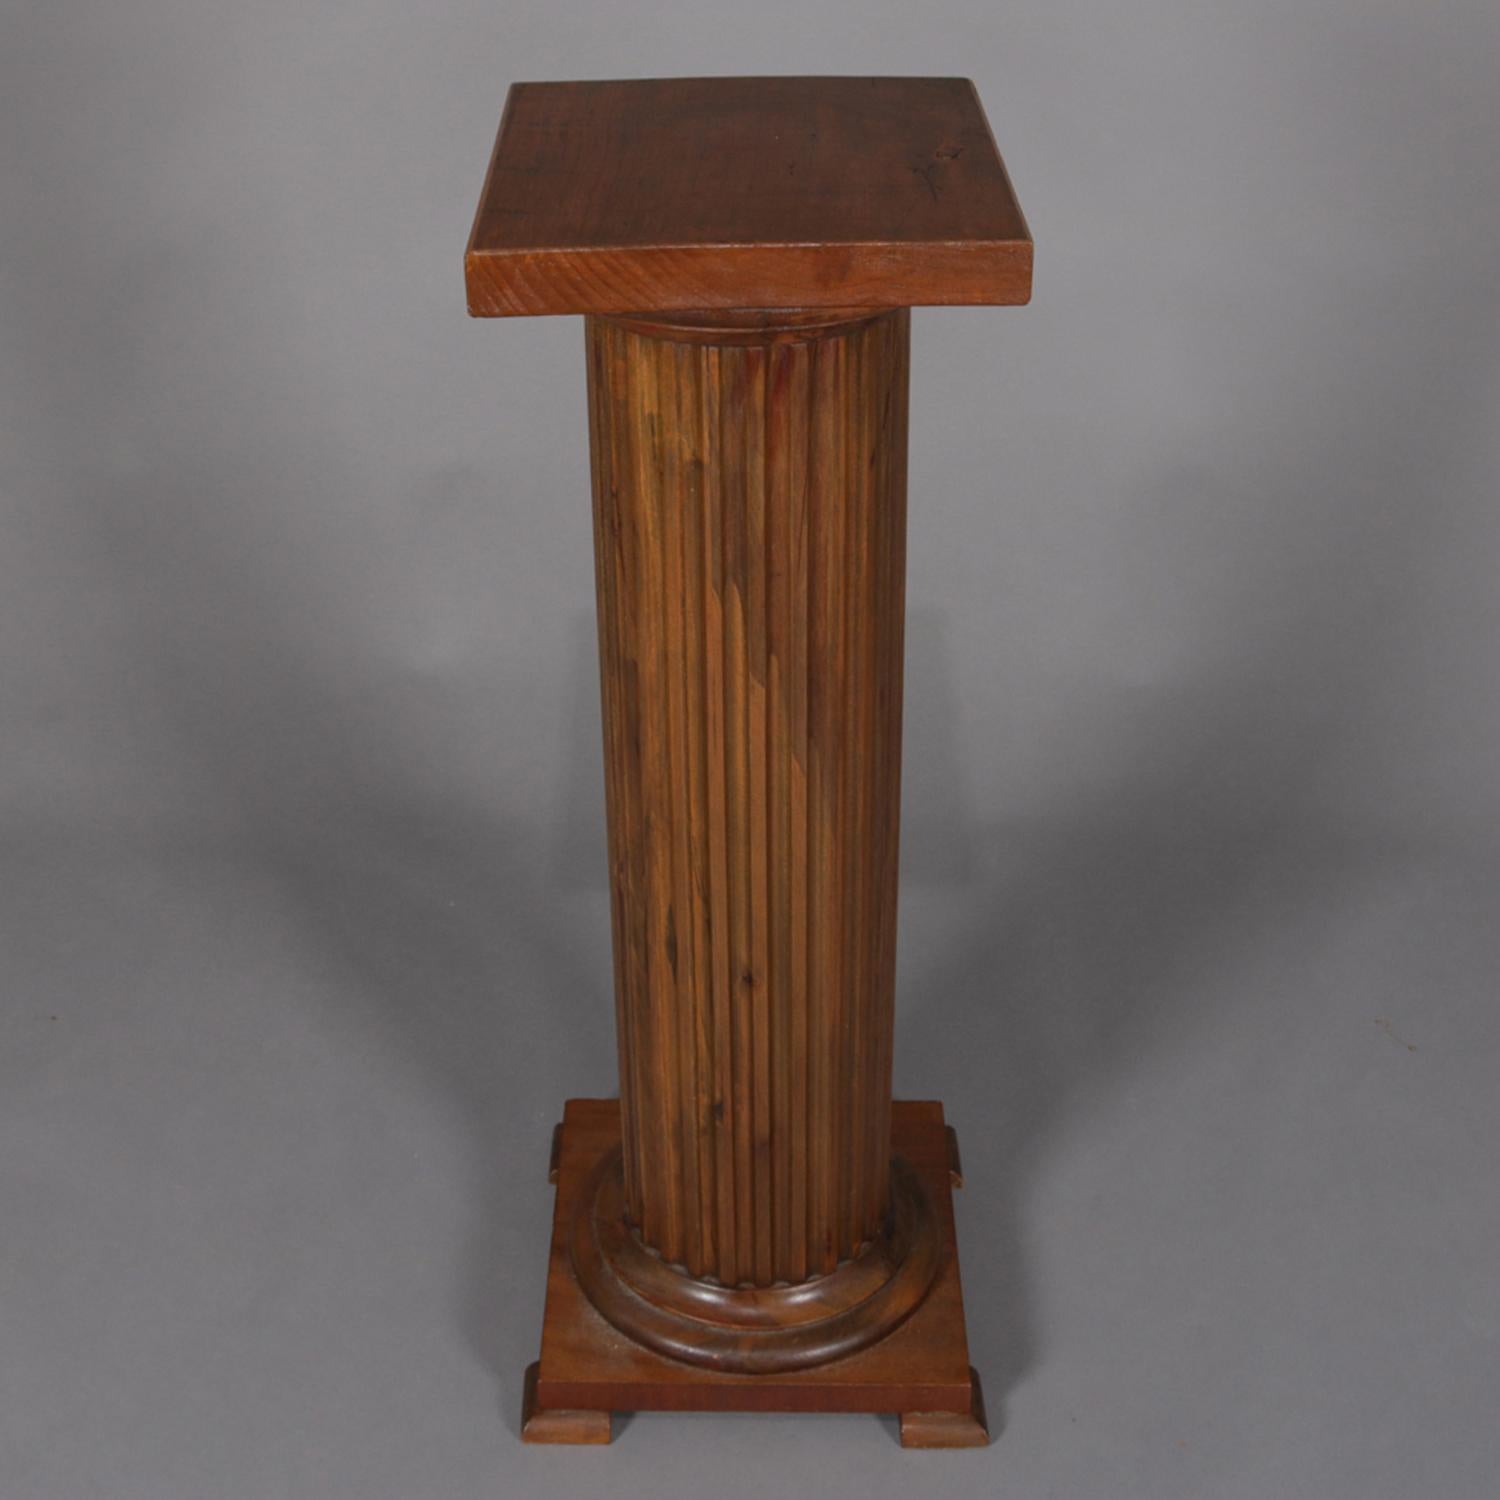 Antique carved oak sculpture display pedestal features Classical Corinthian column-form with reeded shaft having stepped volute and footed base, circa 1900.

Measures: 35.5